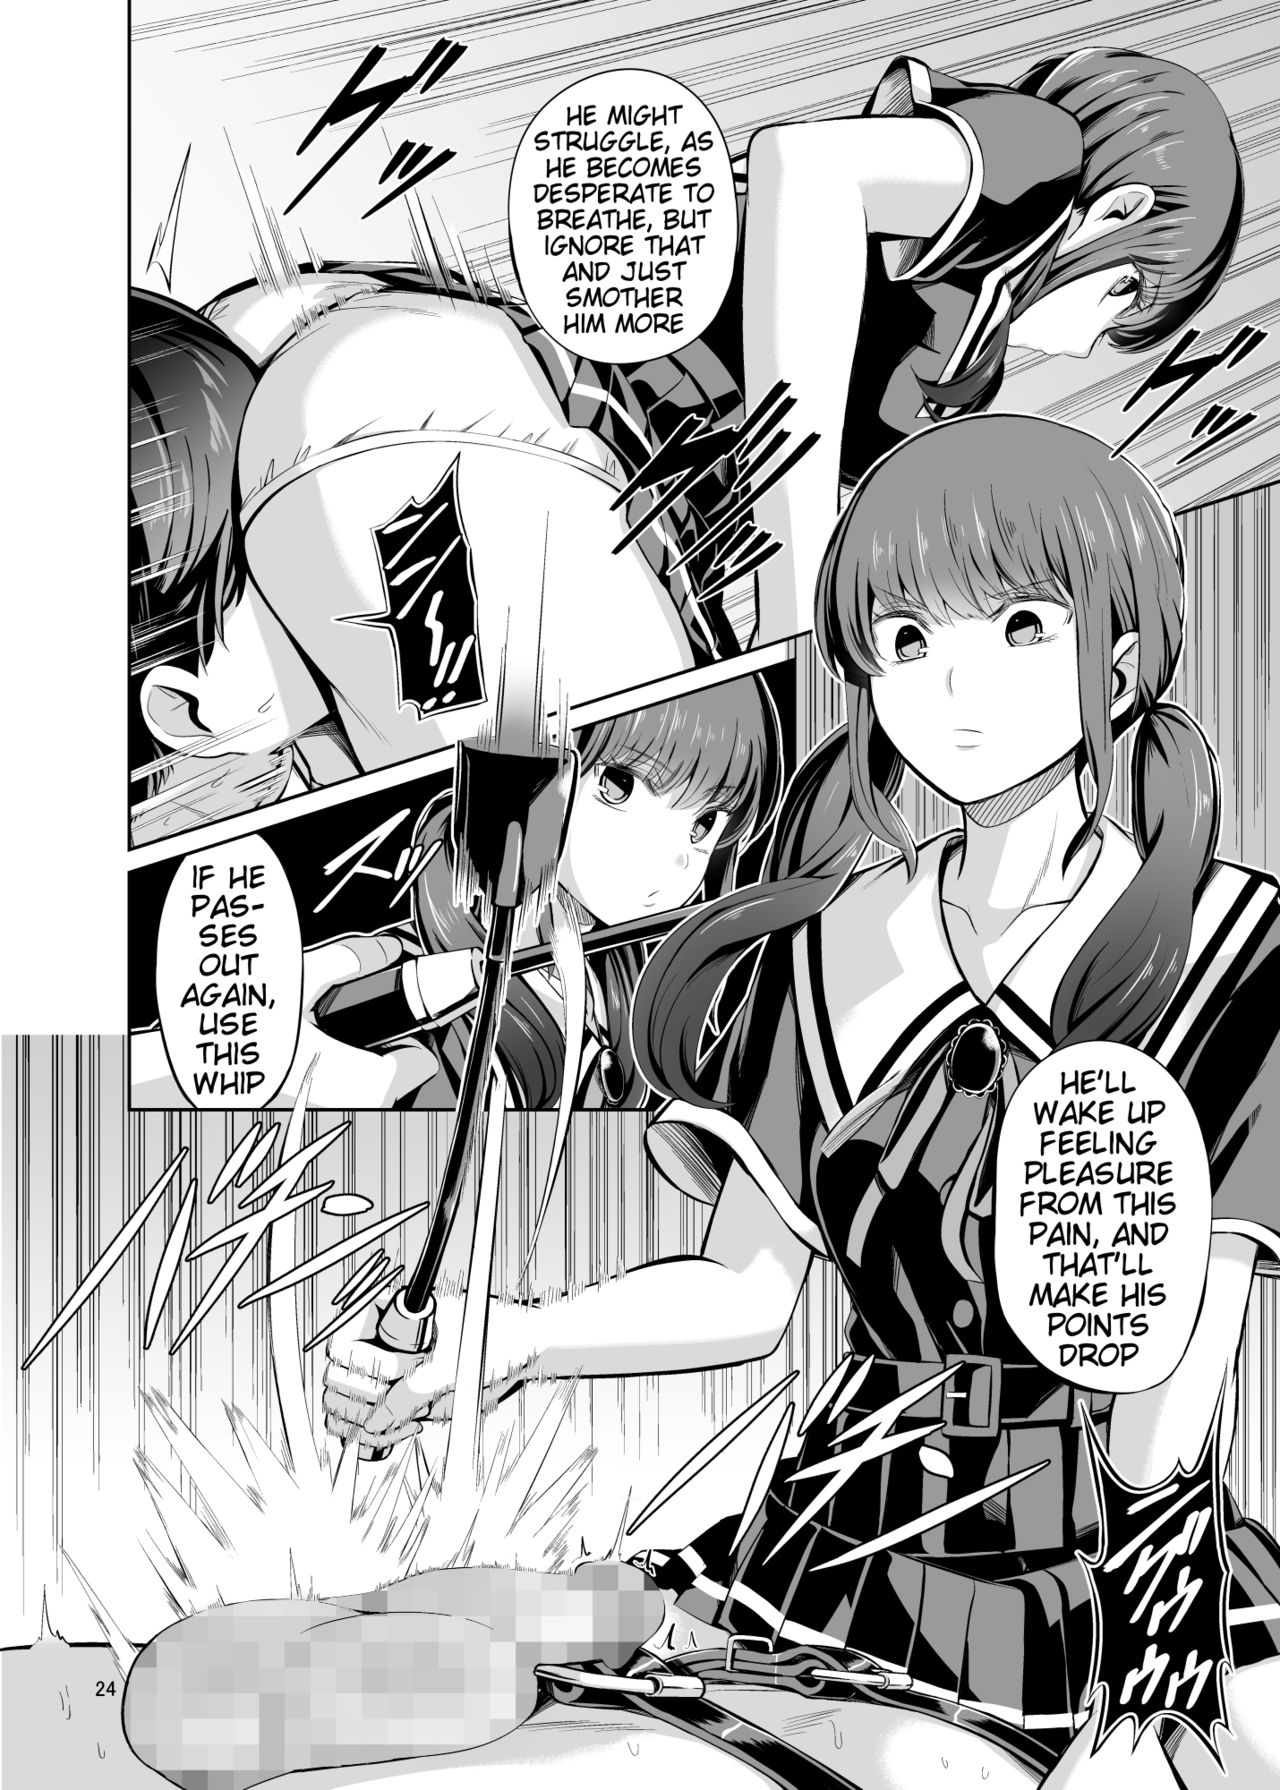 [Yamahata Rian] Tensuushugi no Kuni Kouhen | A Country Based on Point System Sequel [English] [Esoteric_Autist, klow82] page 26 full